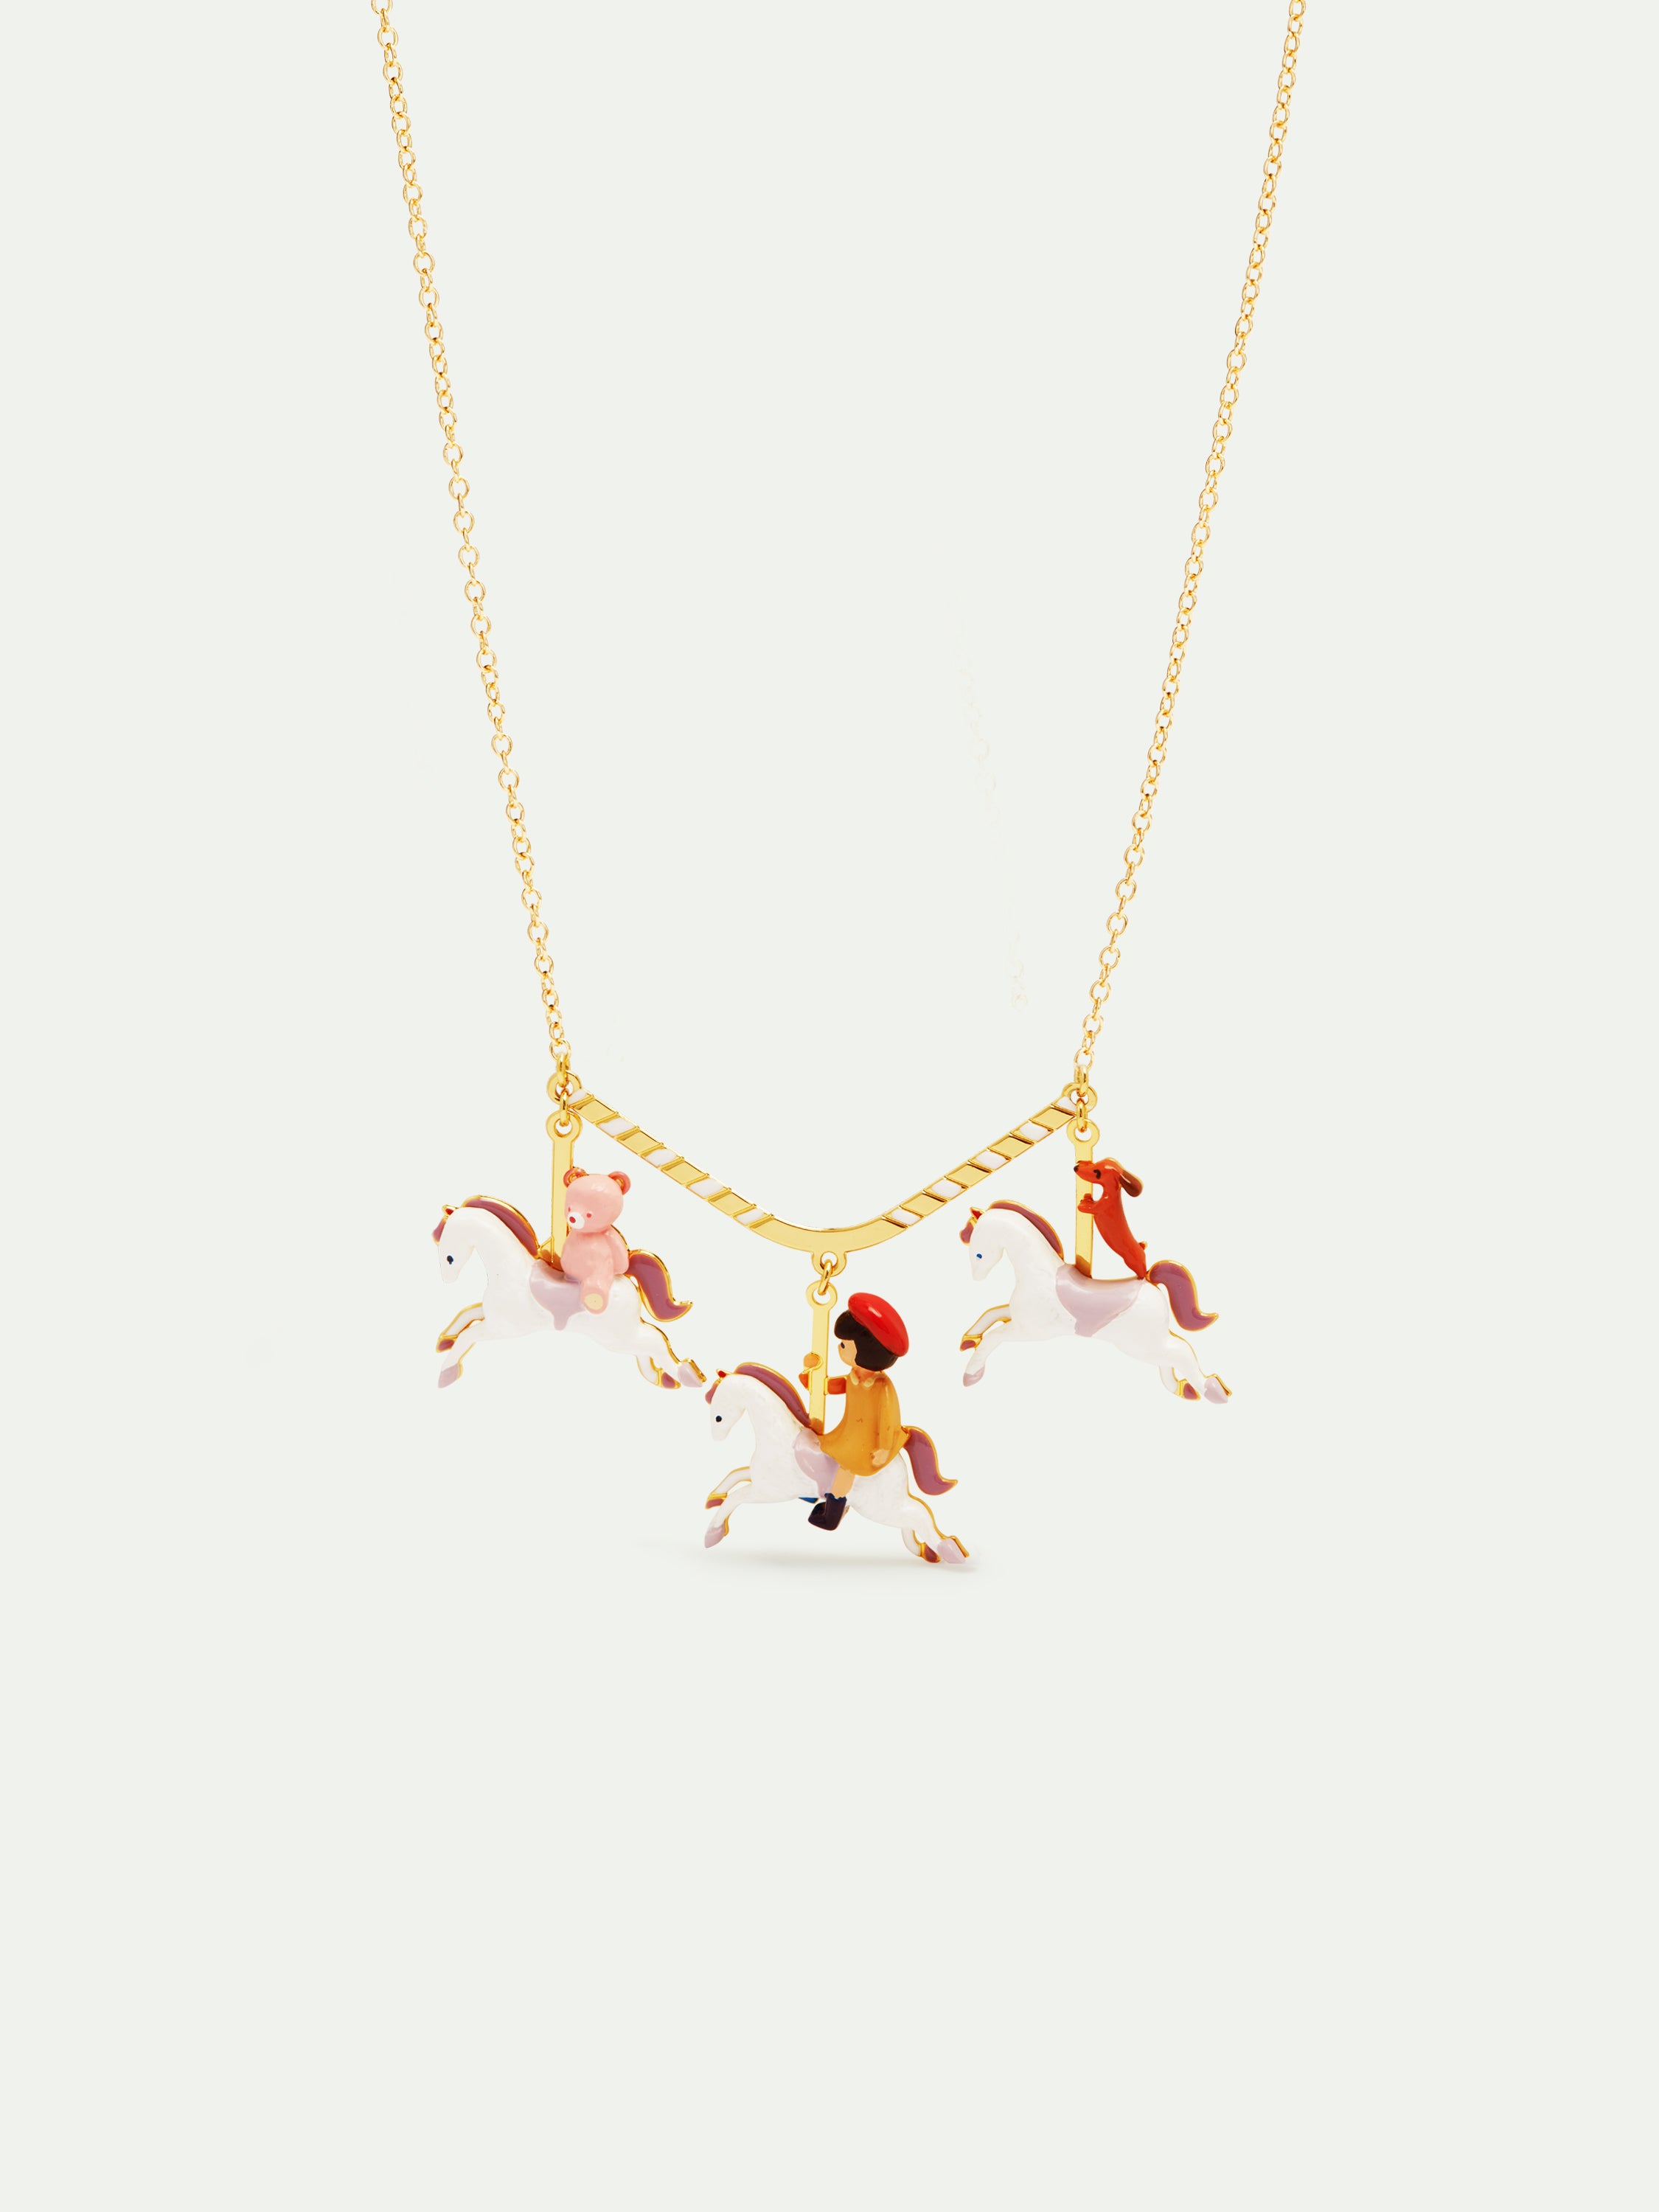 Little girl, dachshund and teddy bear on a carousel statement necklace